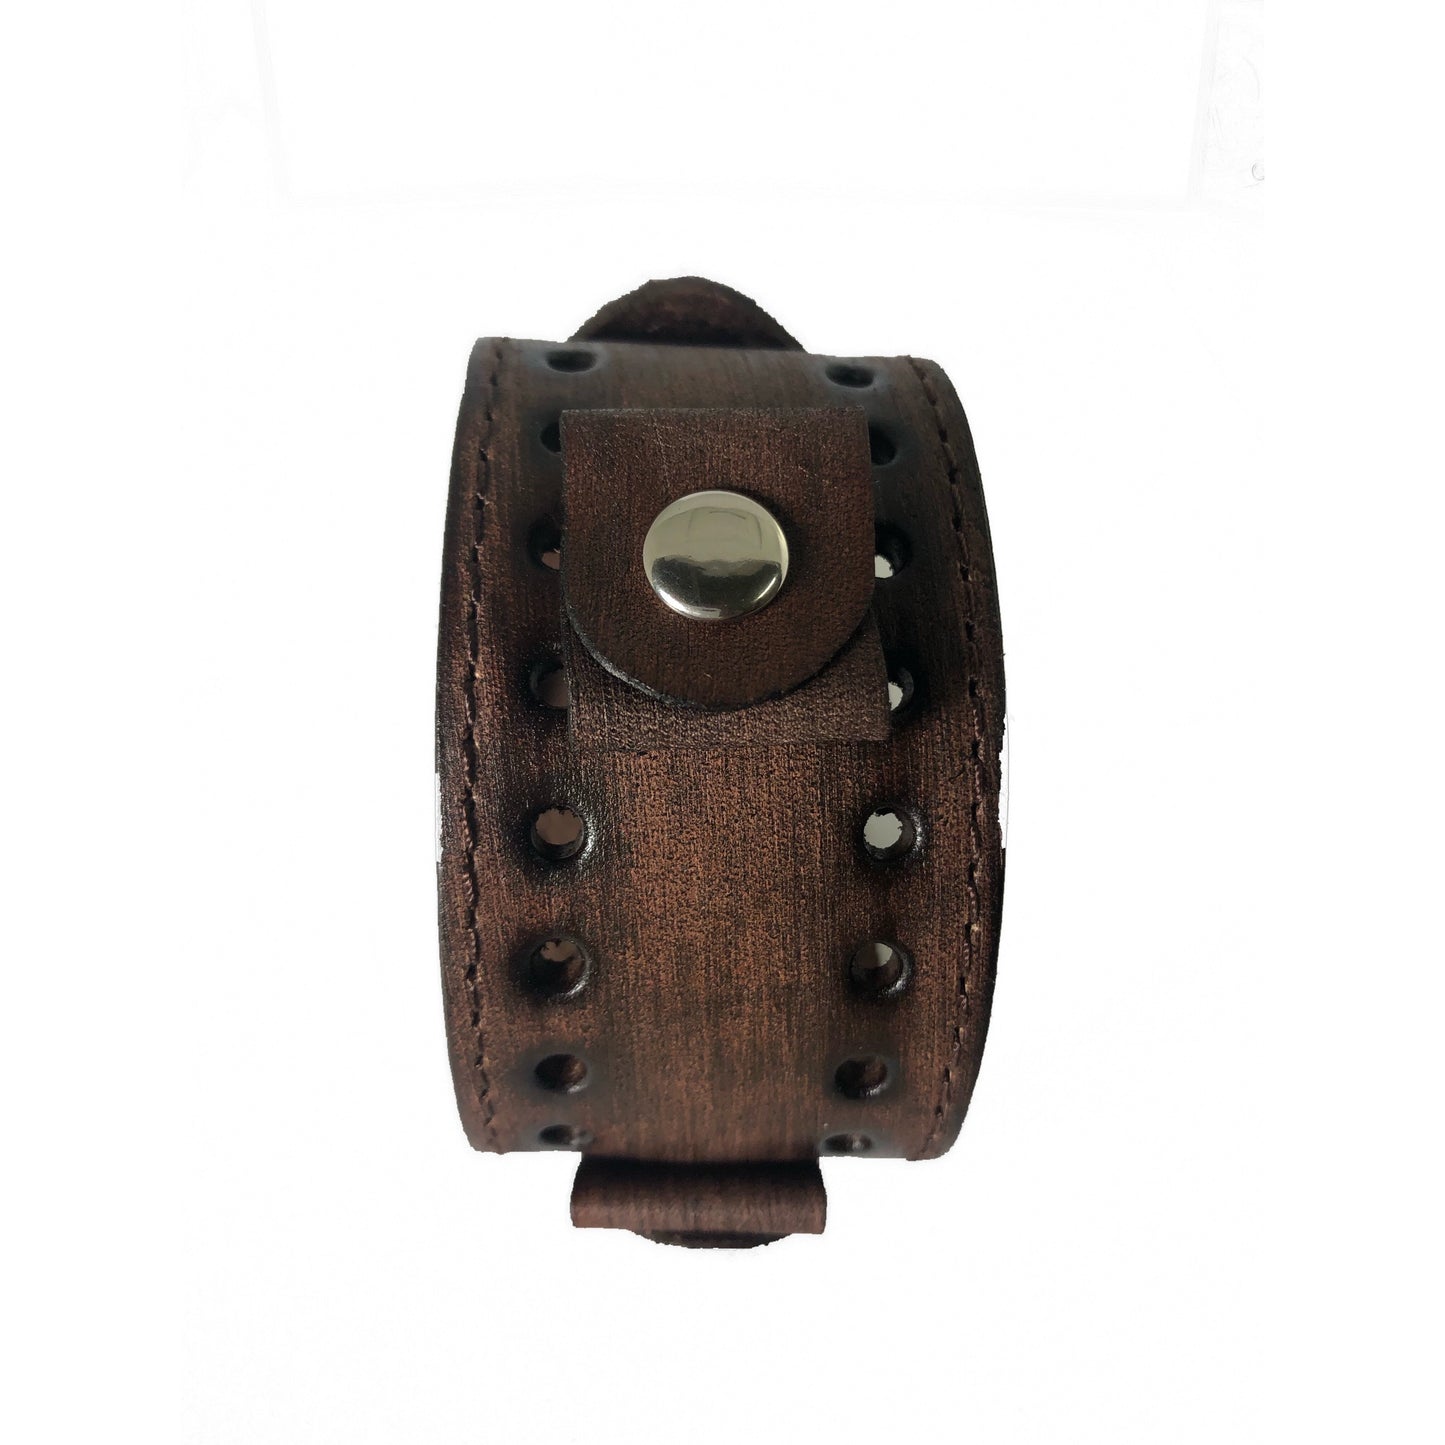 Sully Brown/White Watch with Stitched Dark Brown Leather Cuff